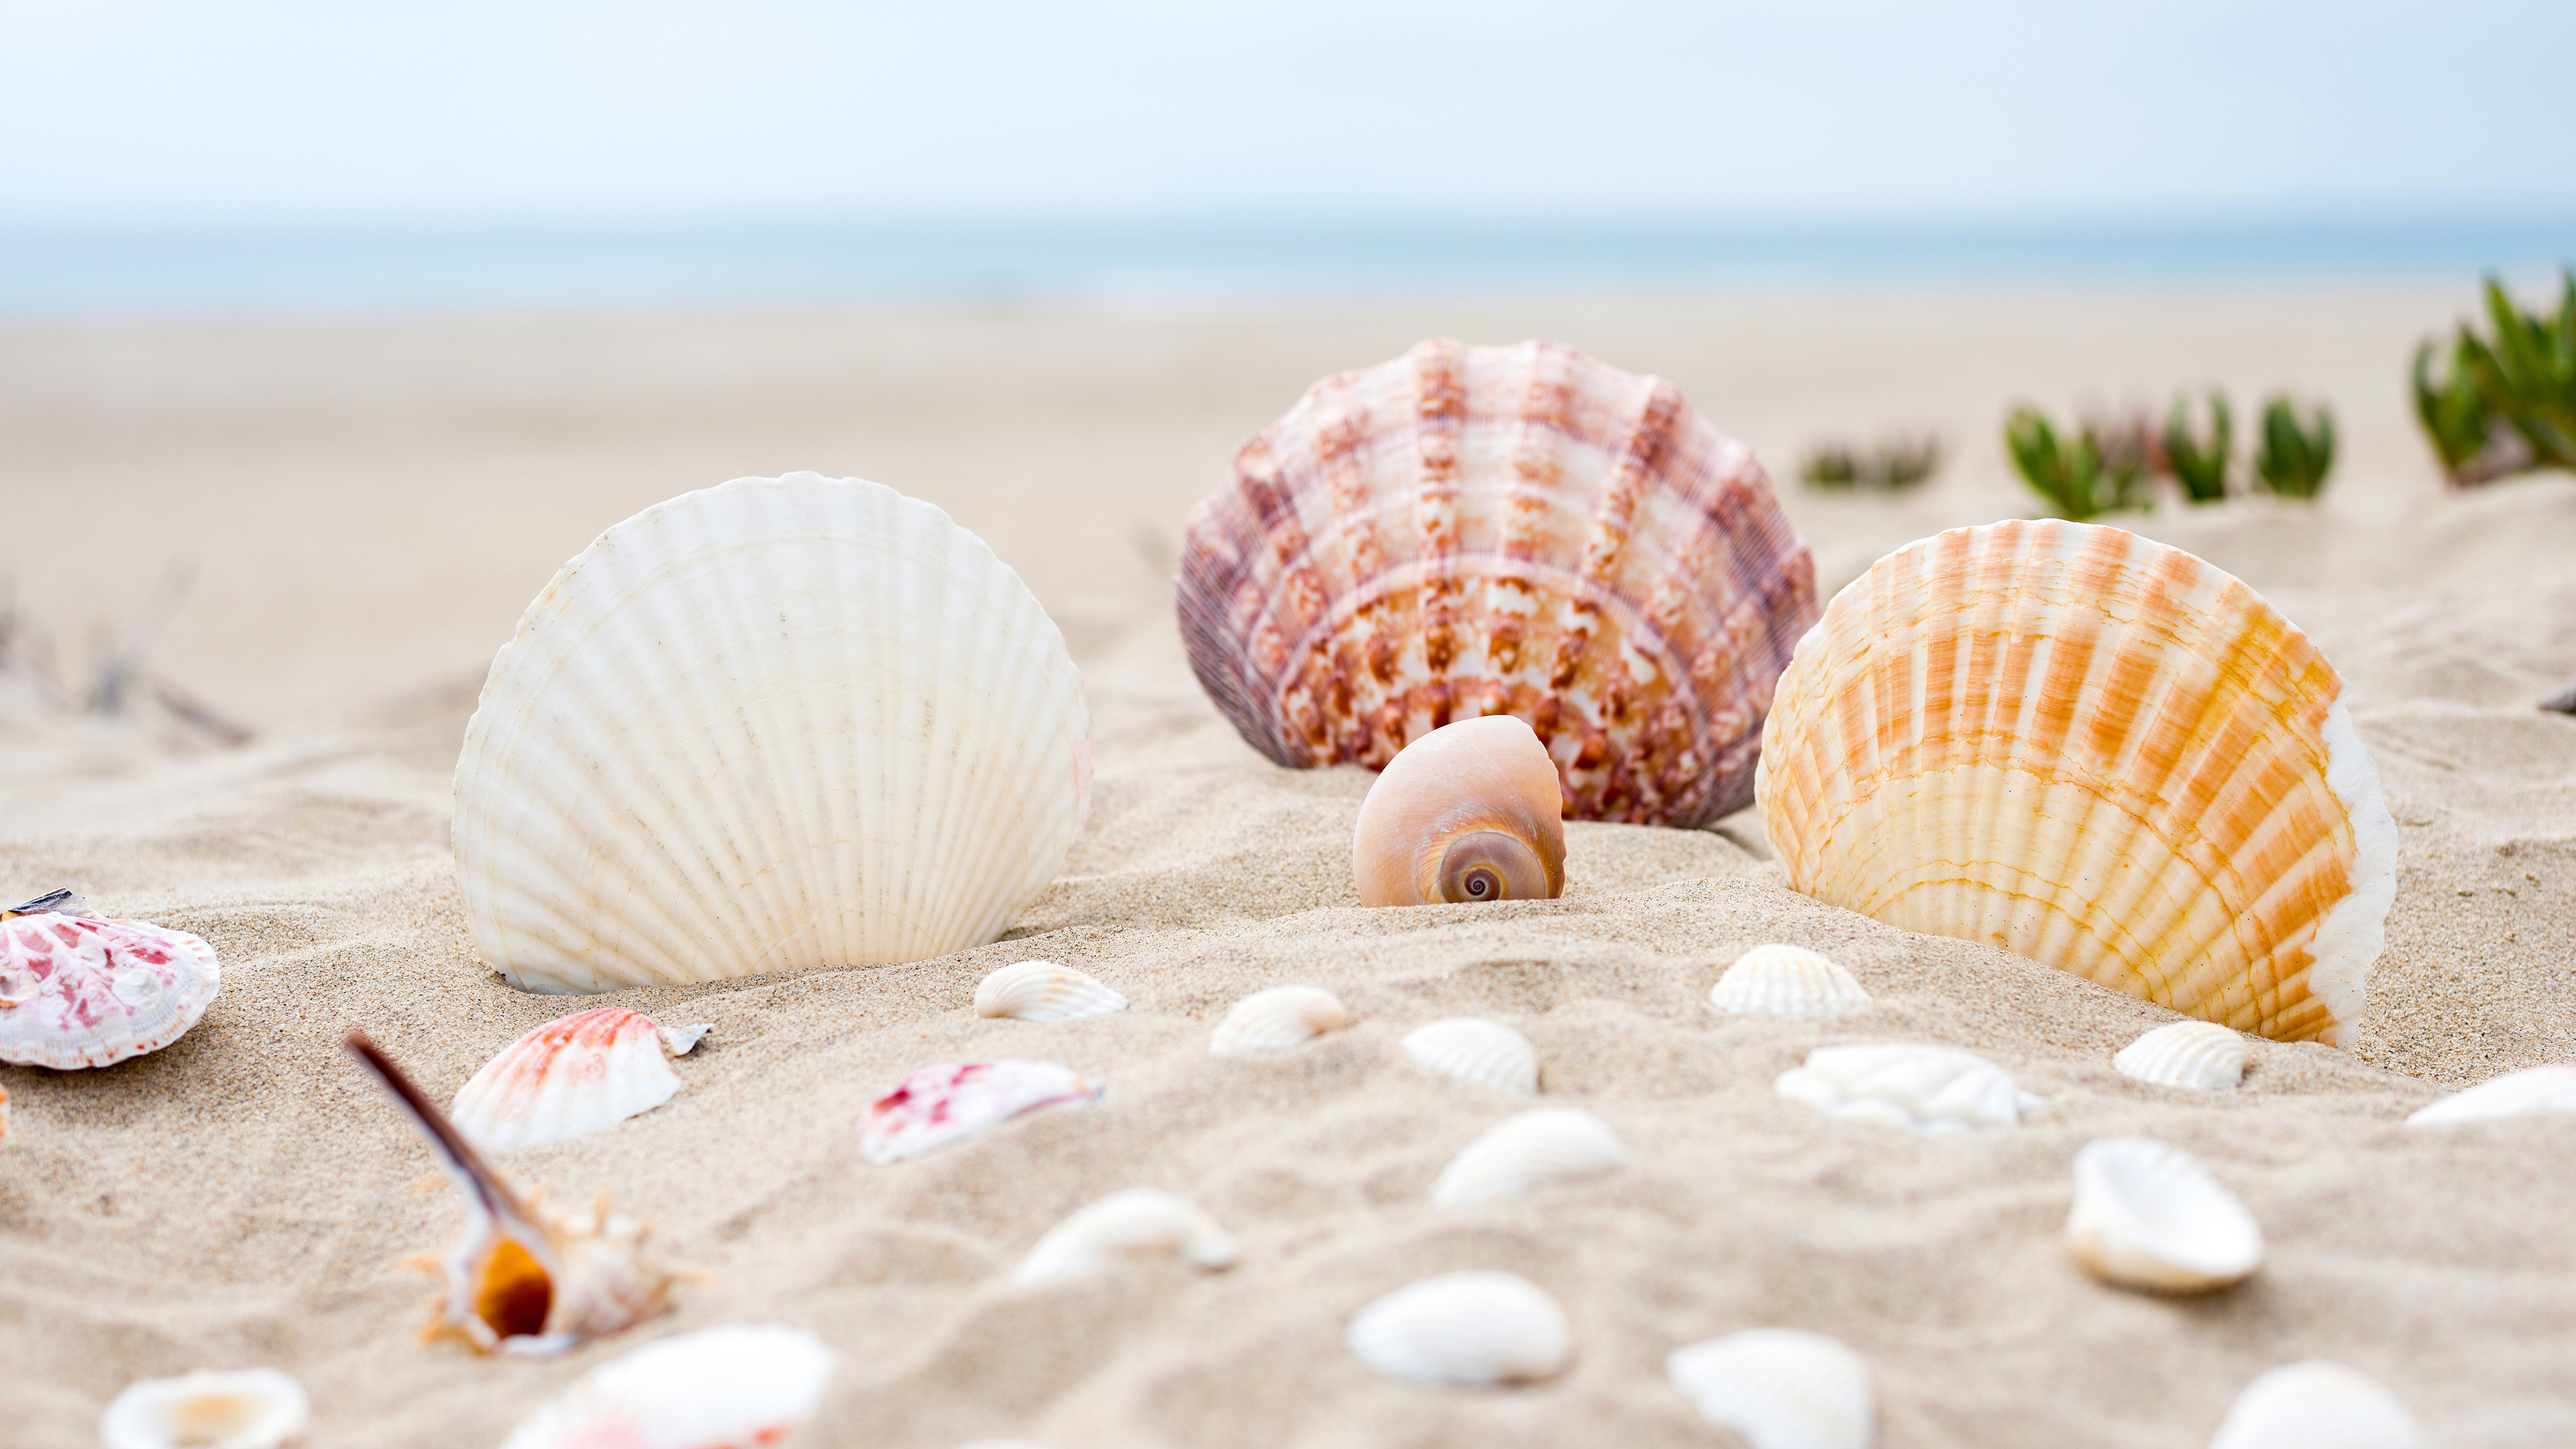 Sea Shell: Created by the molluscs that use them for protection. 3840x2160 4K Background.